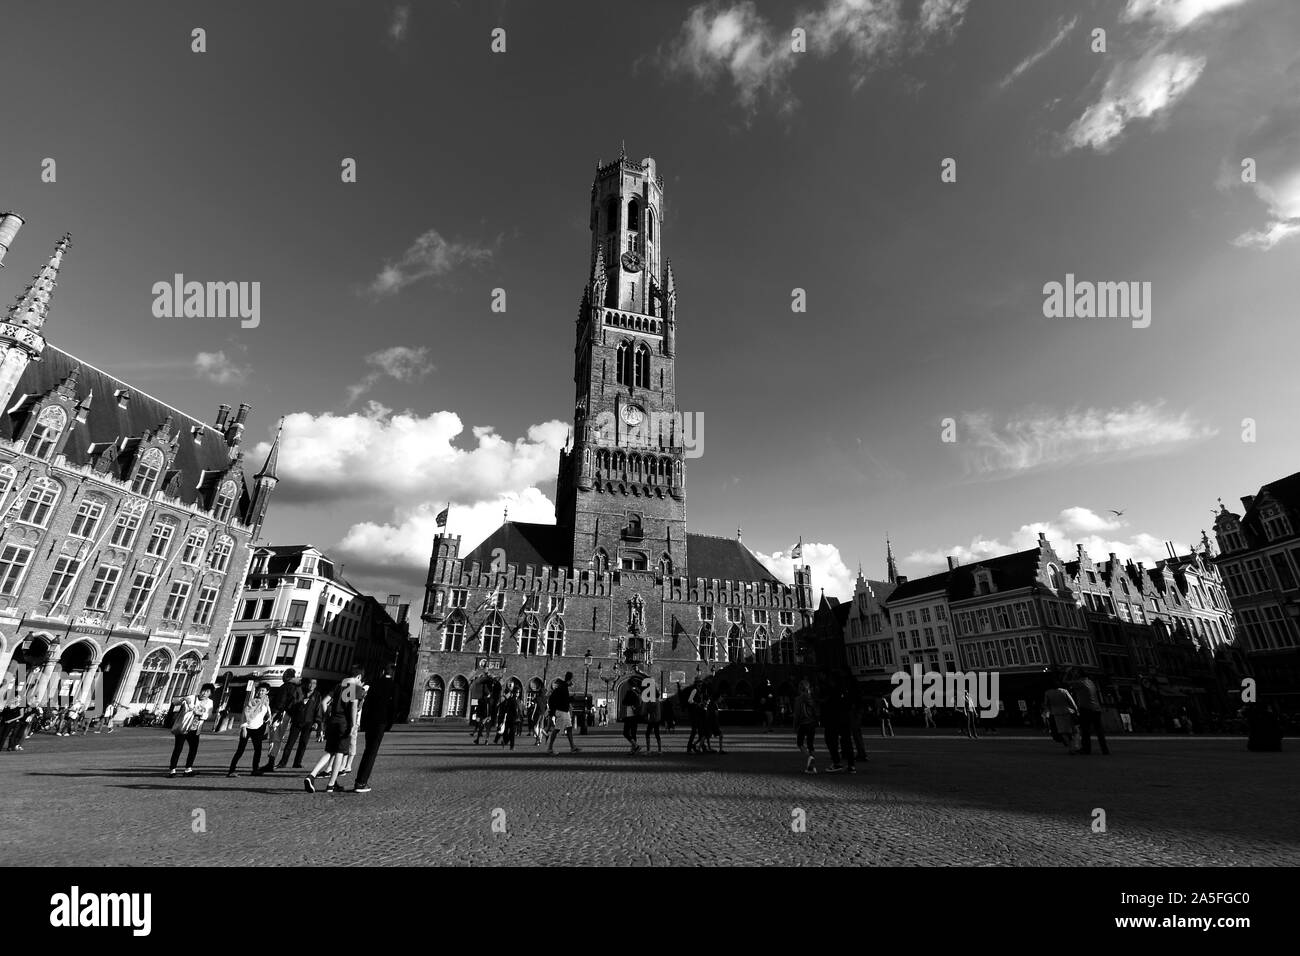 The Belfry or Belfort, a medieval bell tower, Market Square, Bruges, Belgium Stock Photo